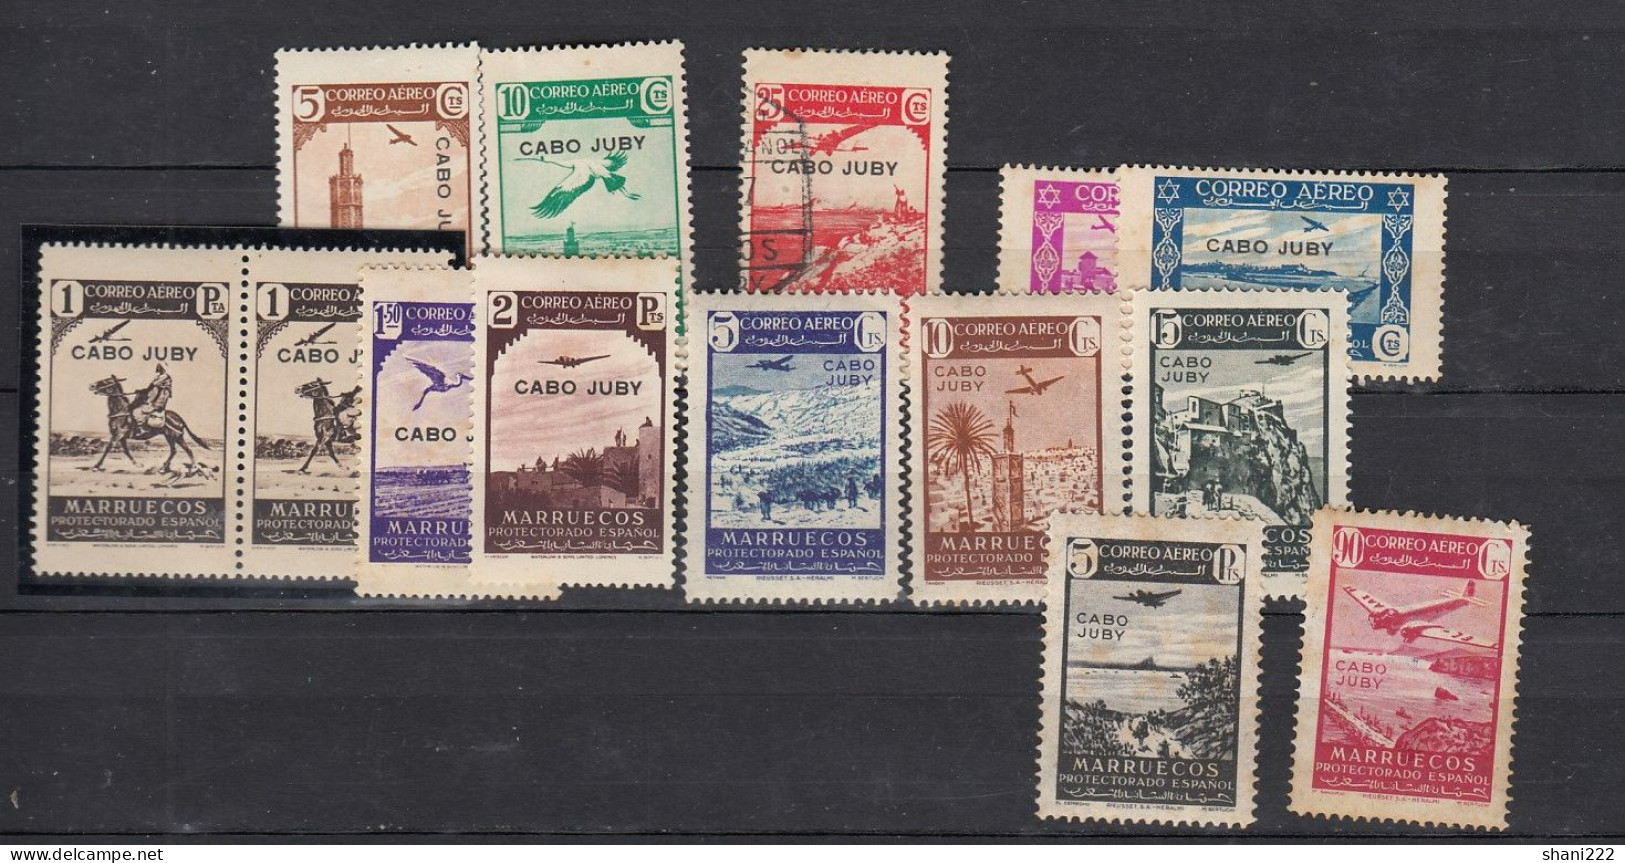 Spain - Cabo Juby - 1938-42 - Airs -  MH (2-156) - Cabo Juby